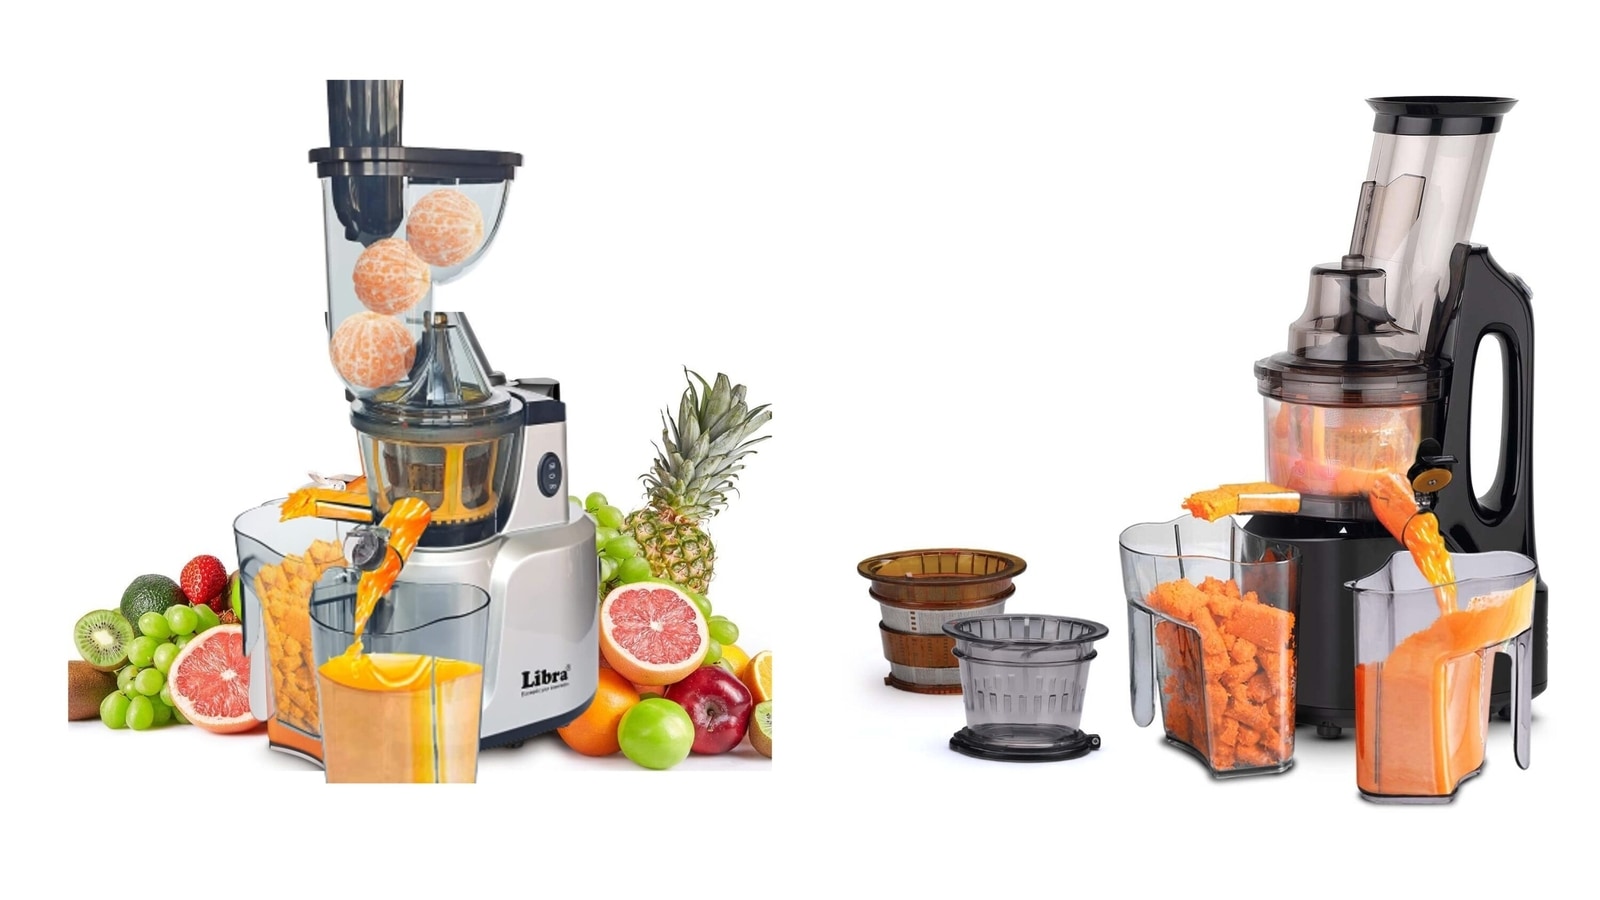 Top 10 cold press juicers: 2023's buyer's guide